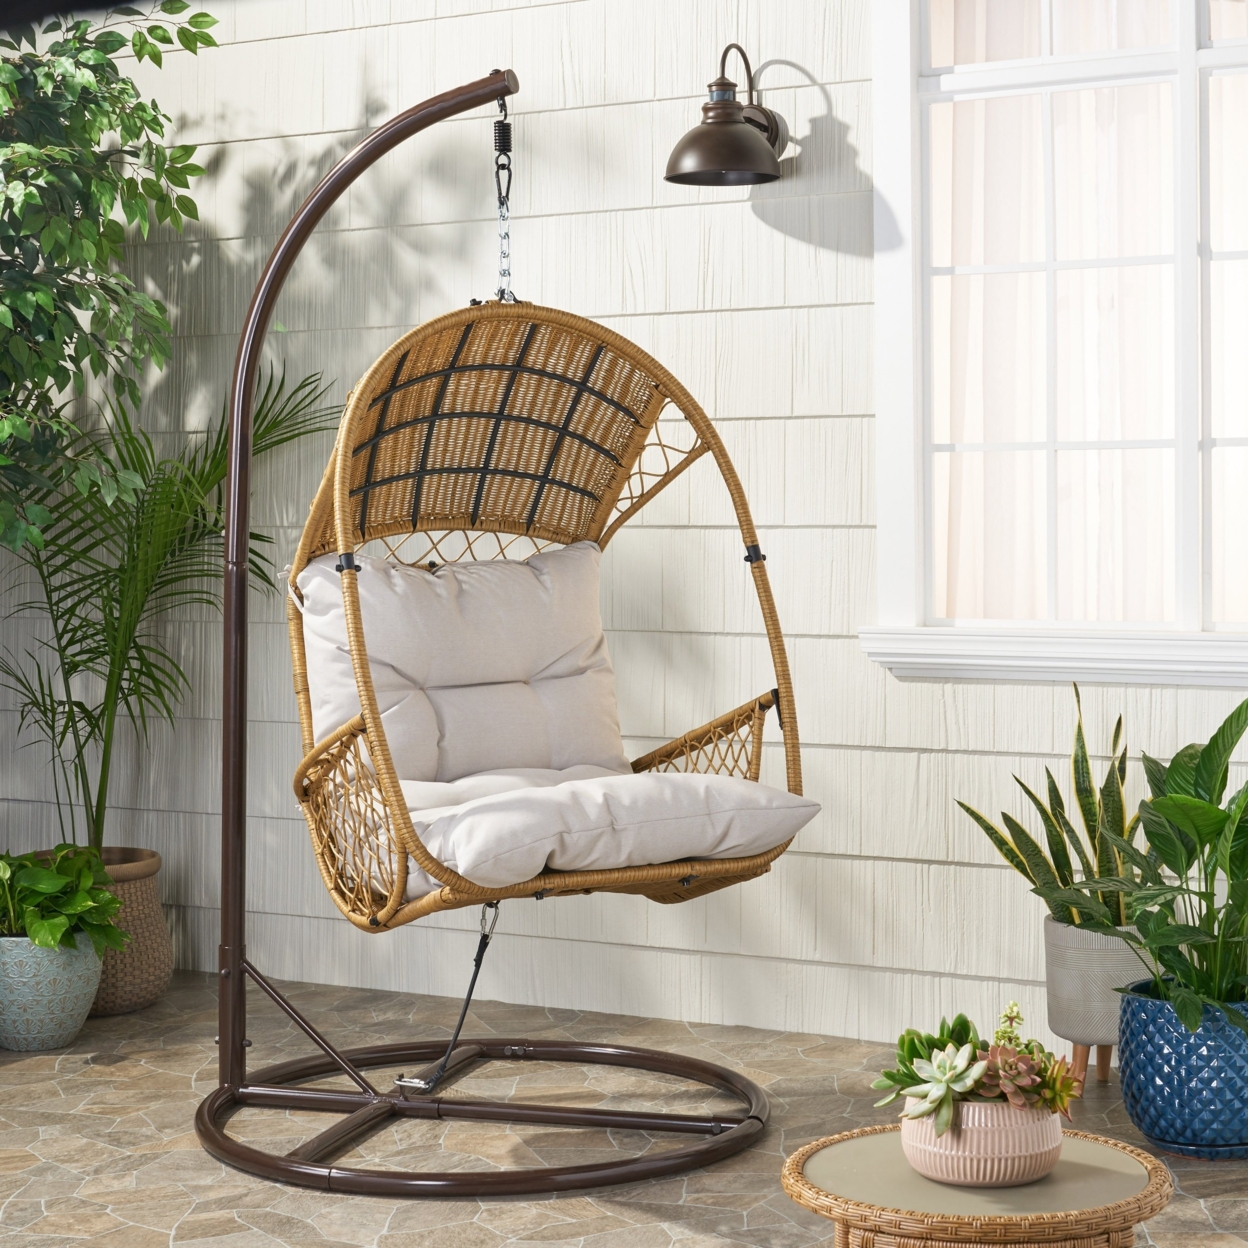 Primo Outdoor Wicker Hanging Basket Egg Chair With Stand - Light Brown